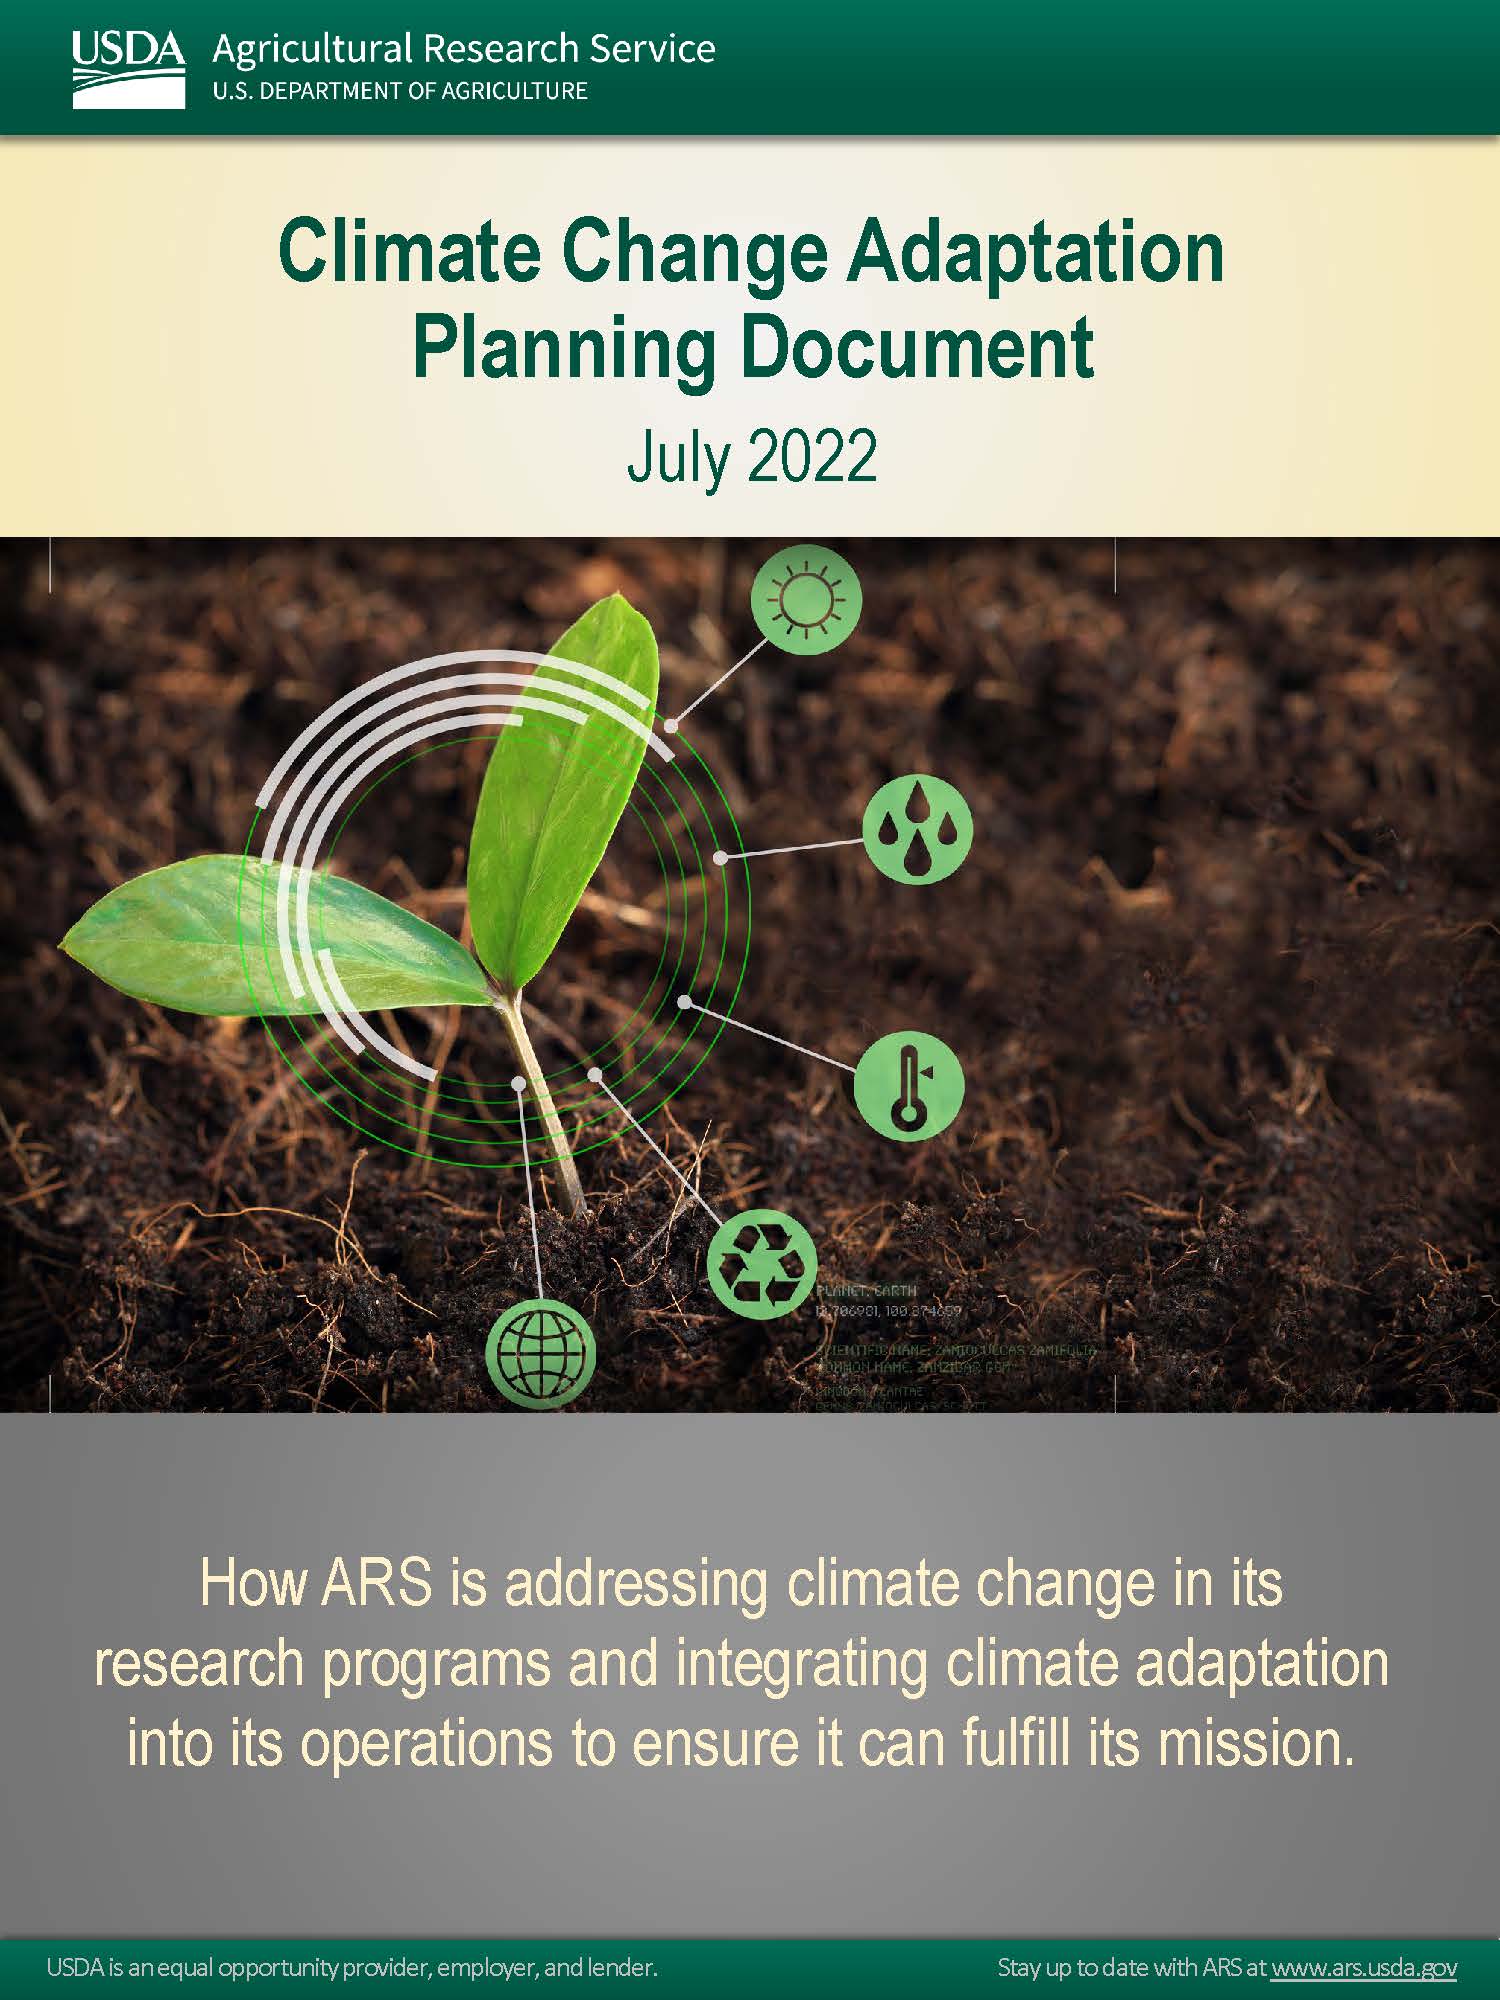 Cover page for the 2022 ARS Action Plan for Climate Adaptation and Resilience, sprout in field.